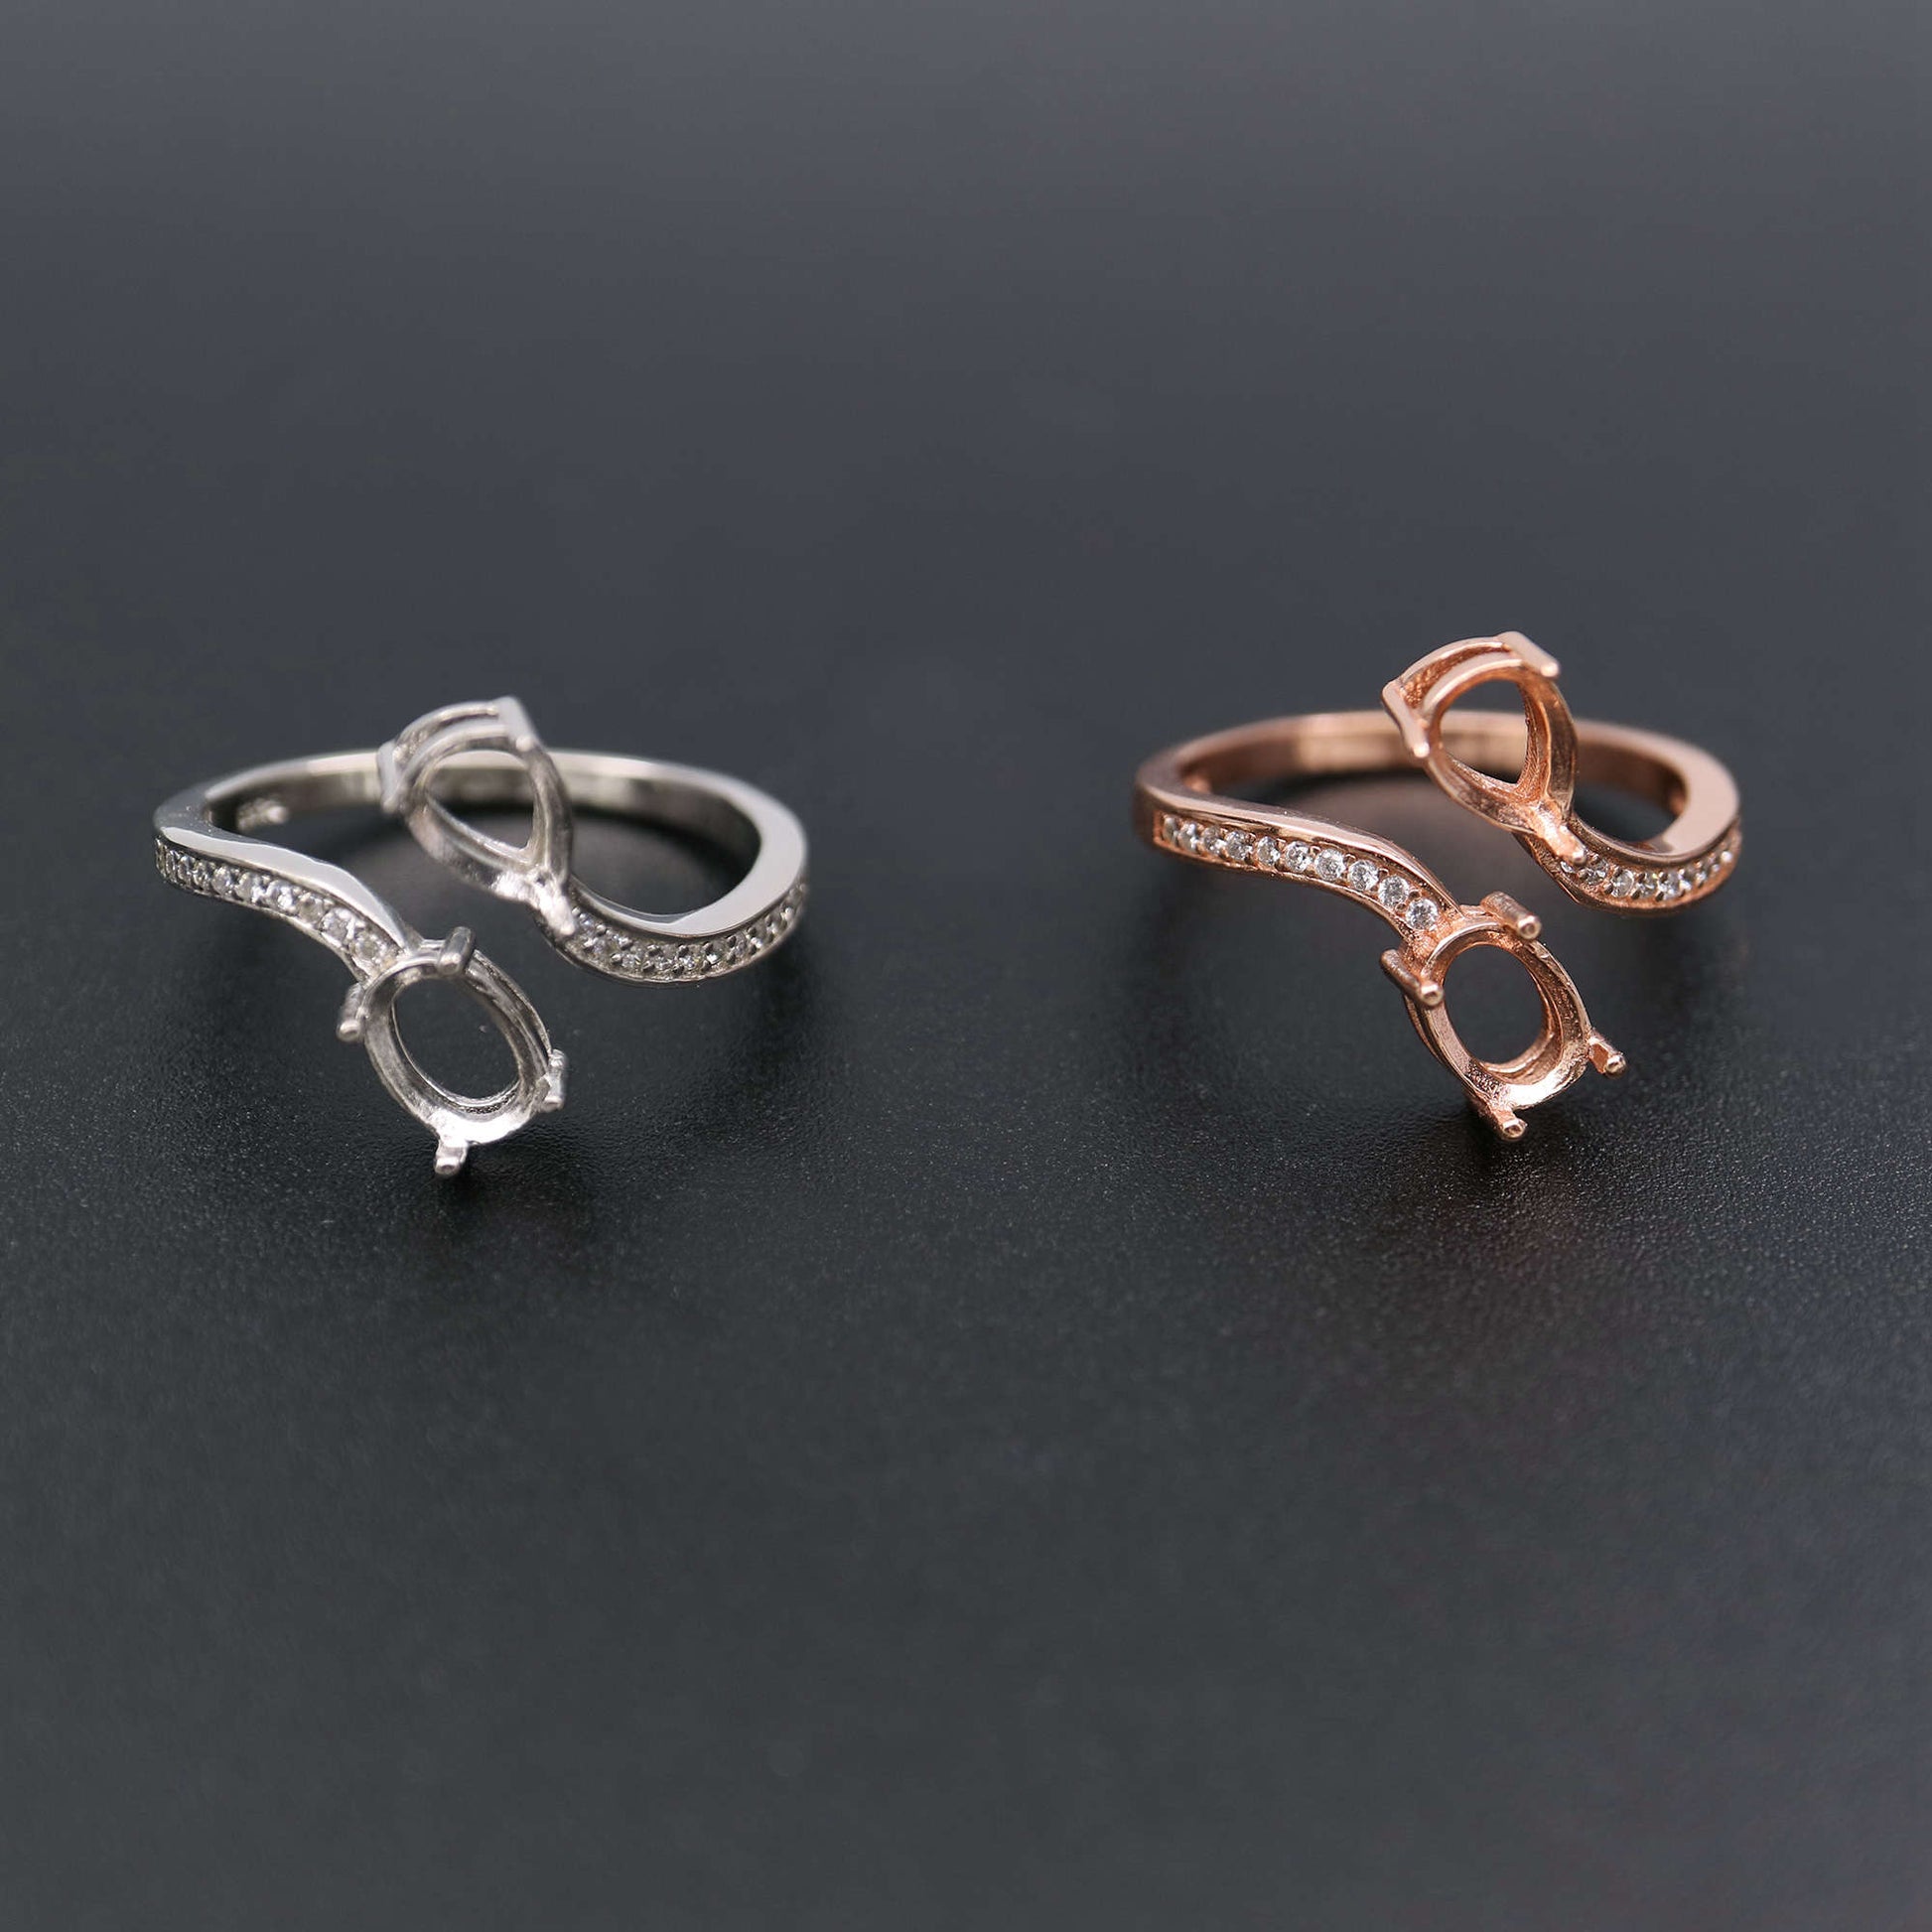 One silver and one rose gold oval wrap around bypass pave semi mounts.